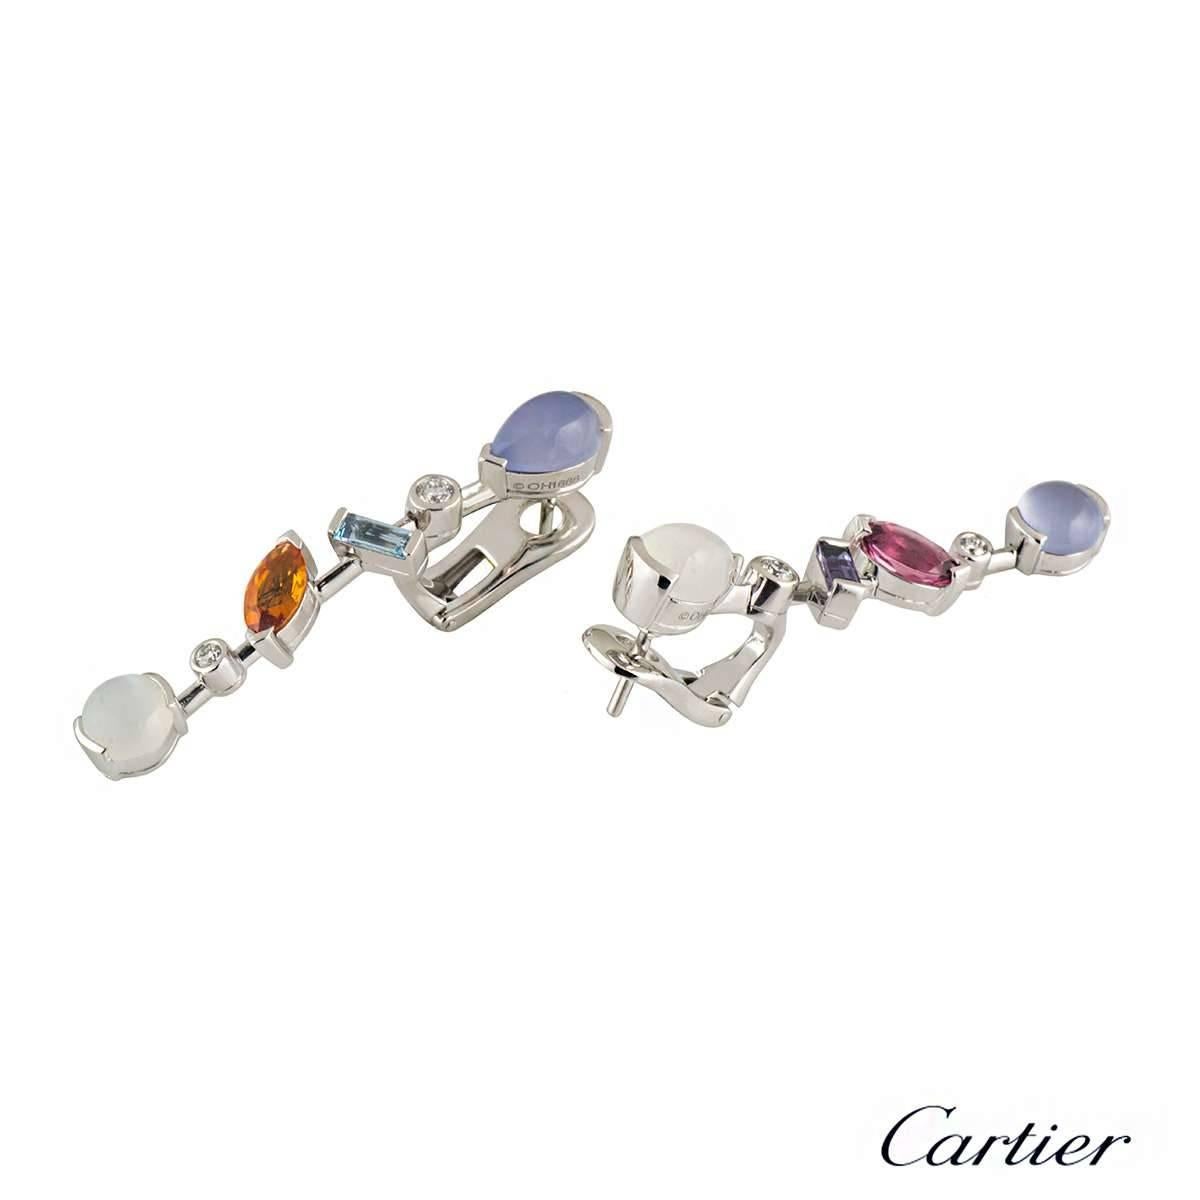 A beautiful pair of earrings in platinum from the Cartier Meli Melo collection. The earrings consist of varying cuts of diamonds, aquamarine, chalcedony, garnet, iolite, pink tourmaline and moonstone set onto a knife edge horizontal bar. The